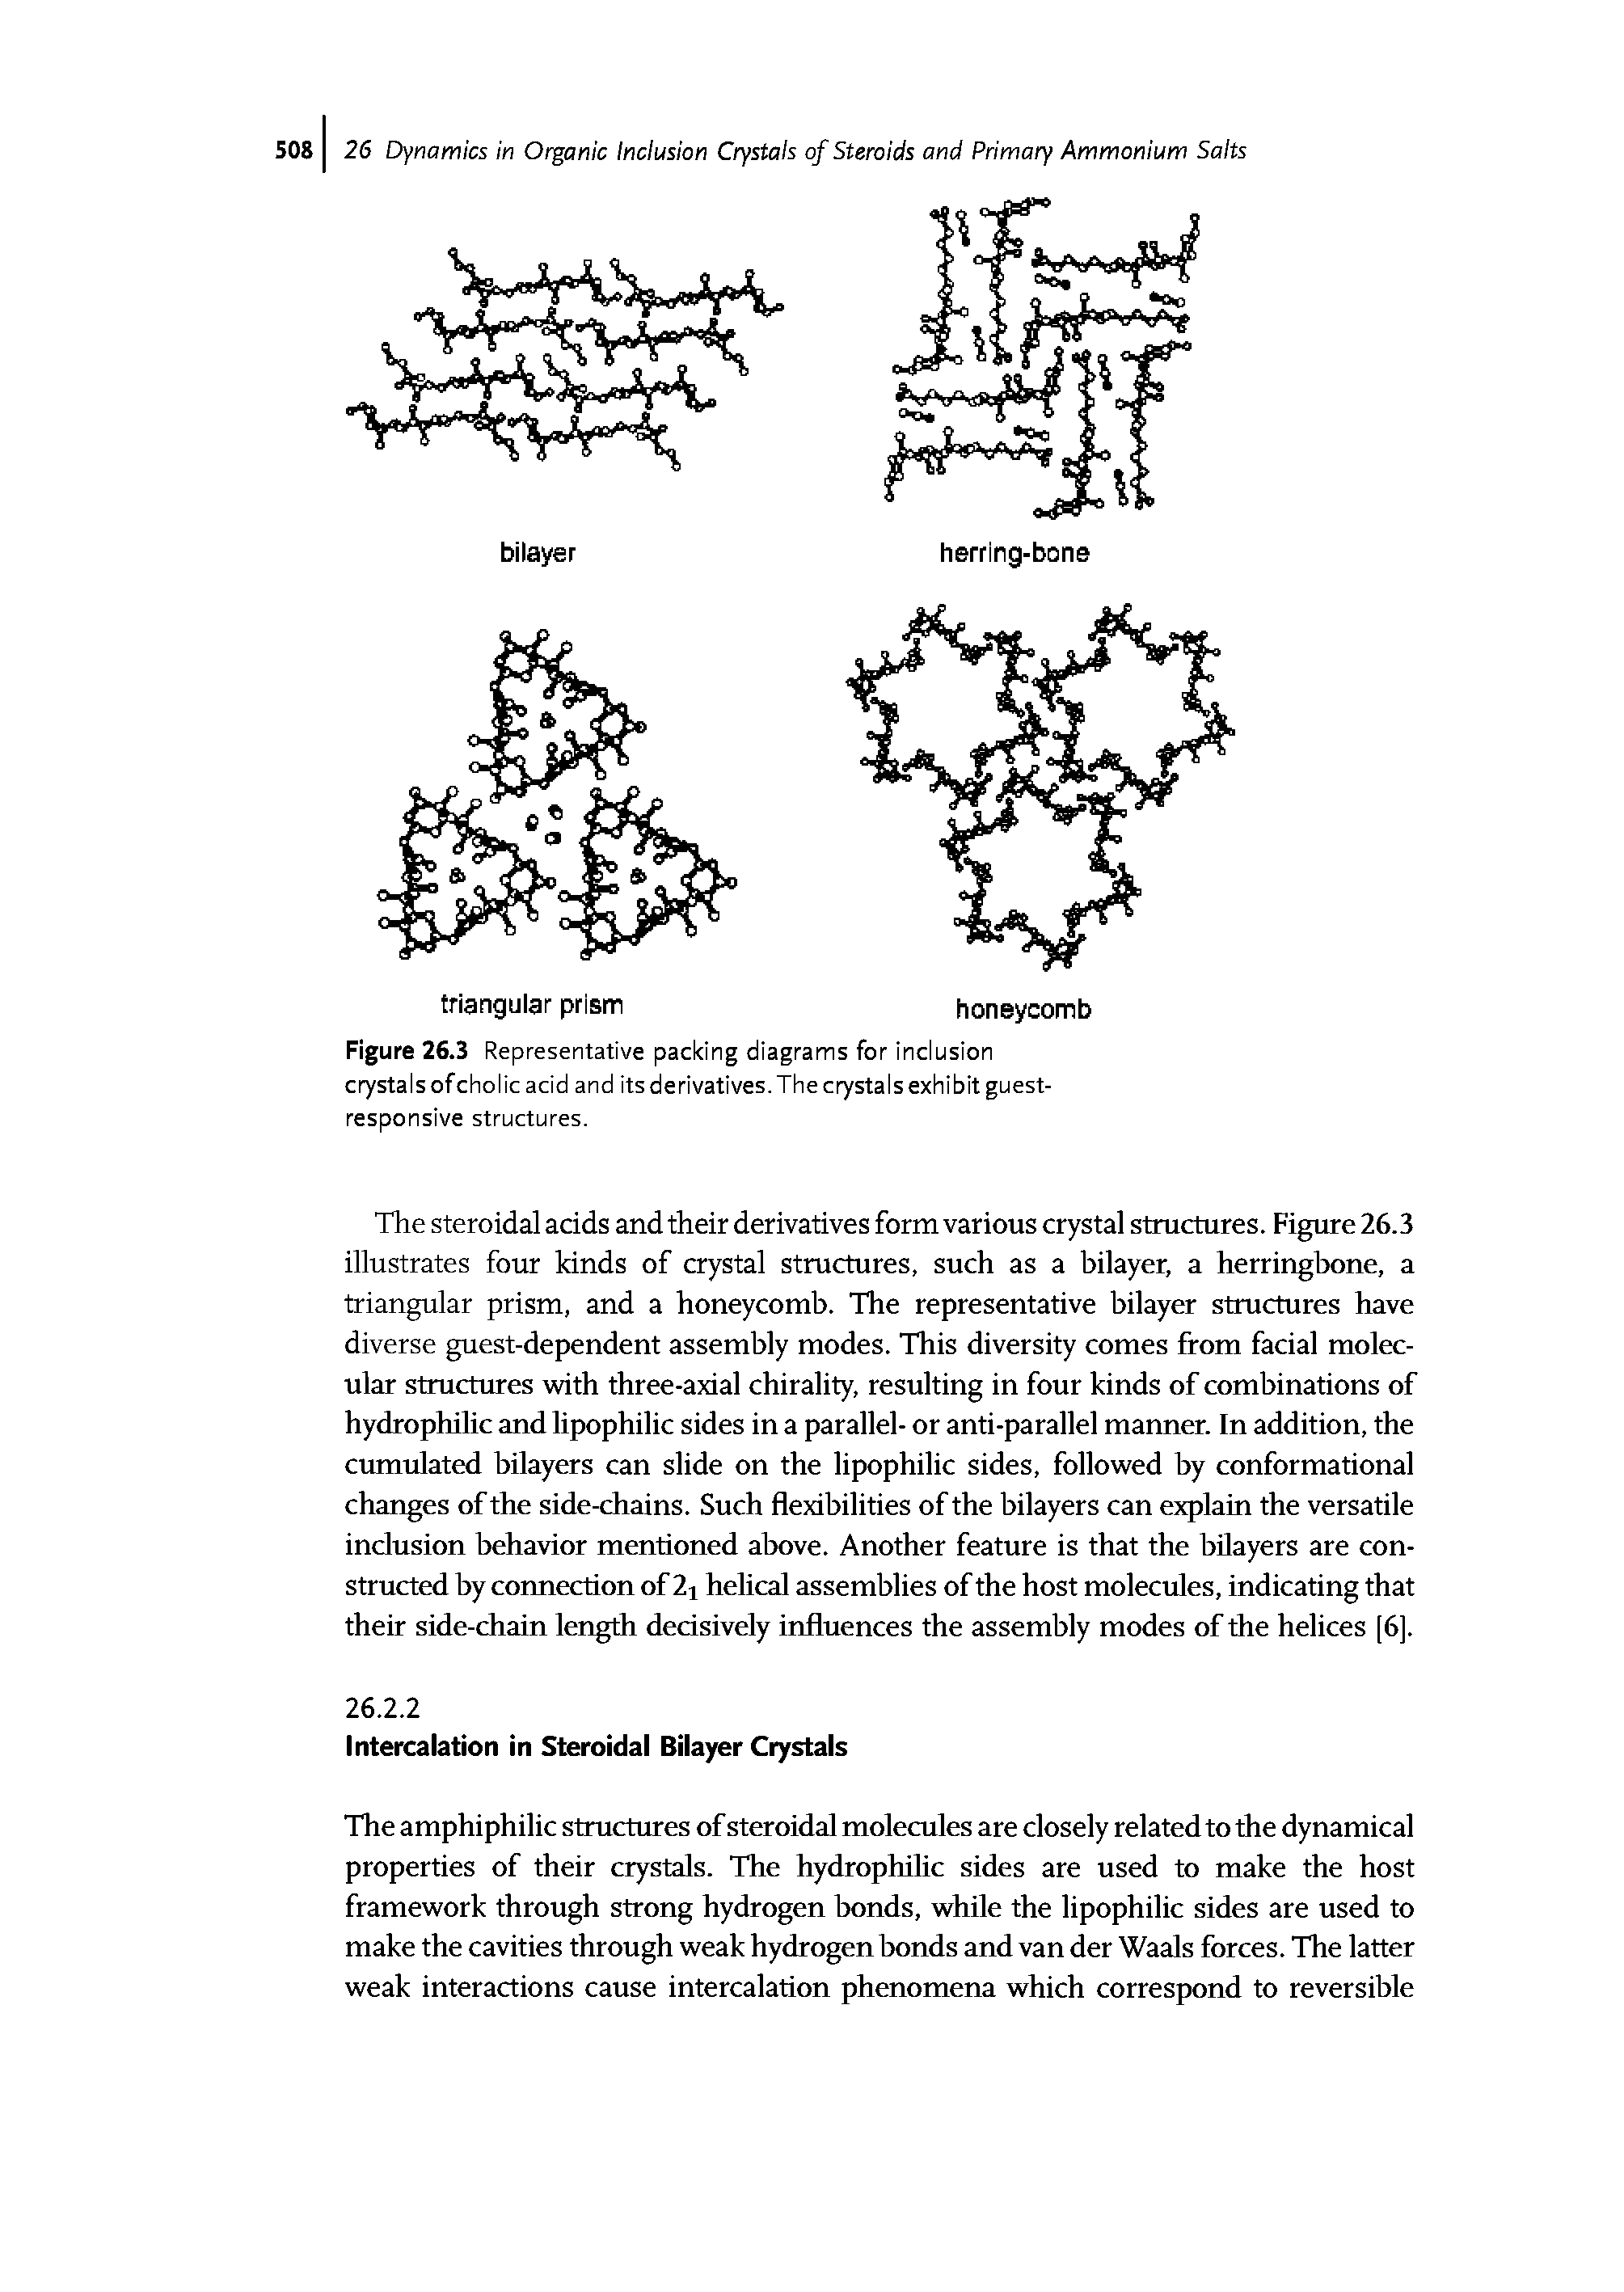 Figure 26.3 Representative packing diagrams for inclusion crystals ofcholic acid and its derivatives. The crystals exhibit guest-responsive structures.